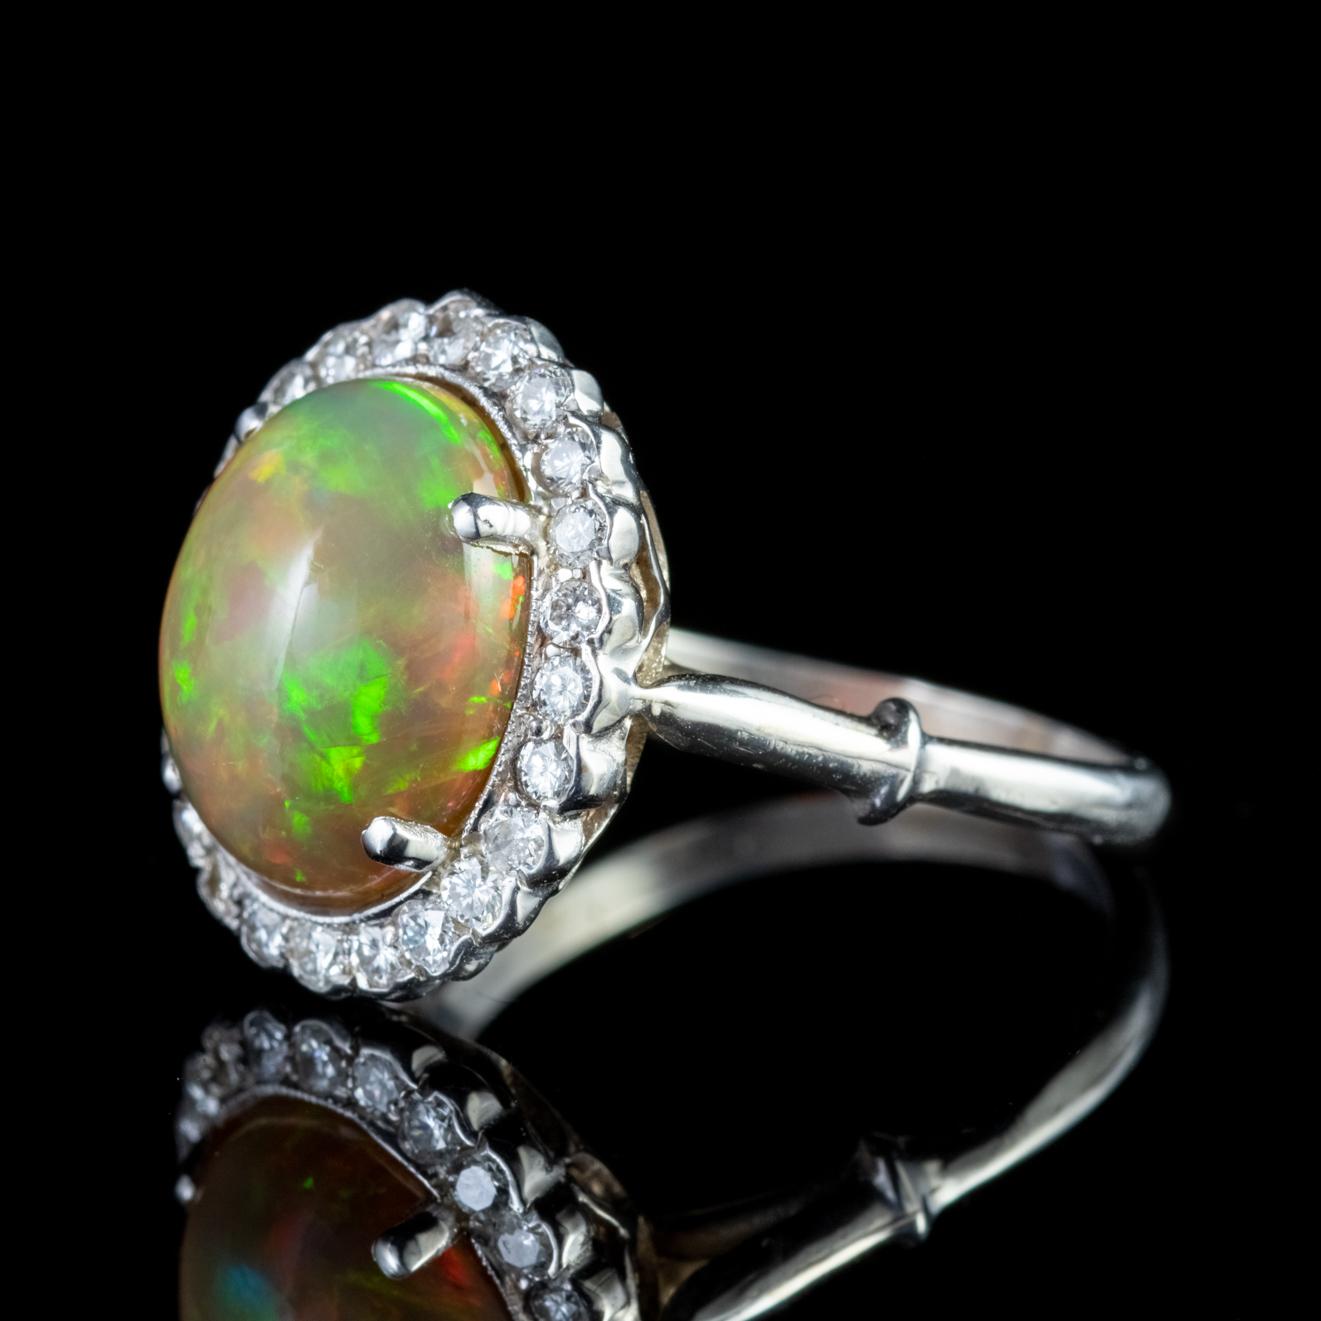 Antique Edwardian Opal Diamond Ring Platinum 6 Carat Natural Opal, circa 1910 In Good Condition For Sale In Lancaster, Lancashire